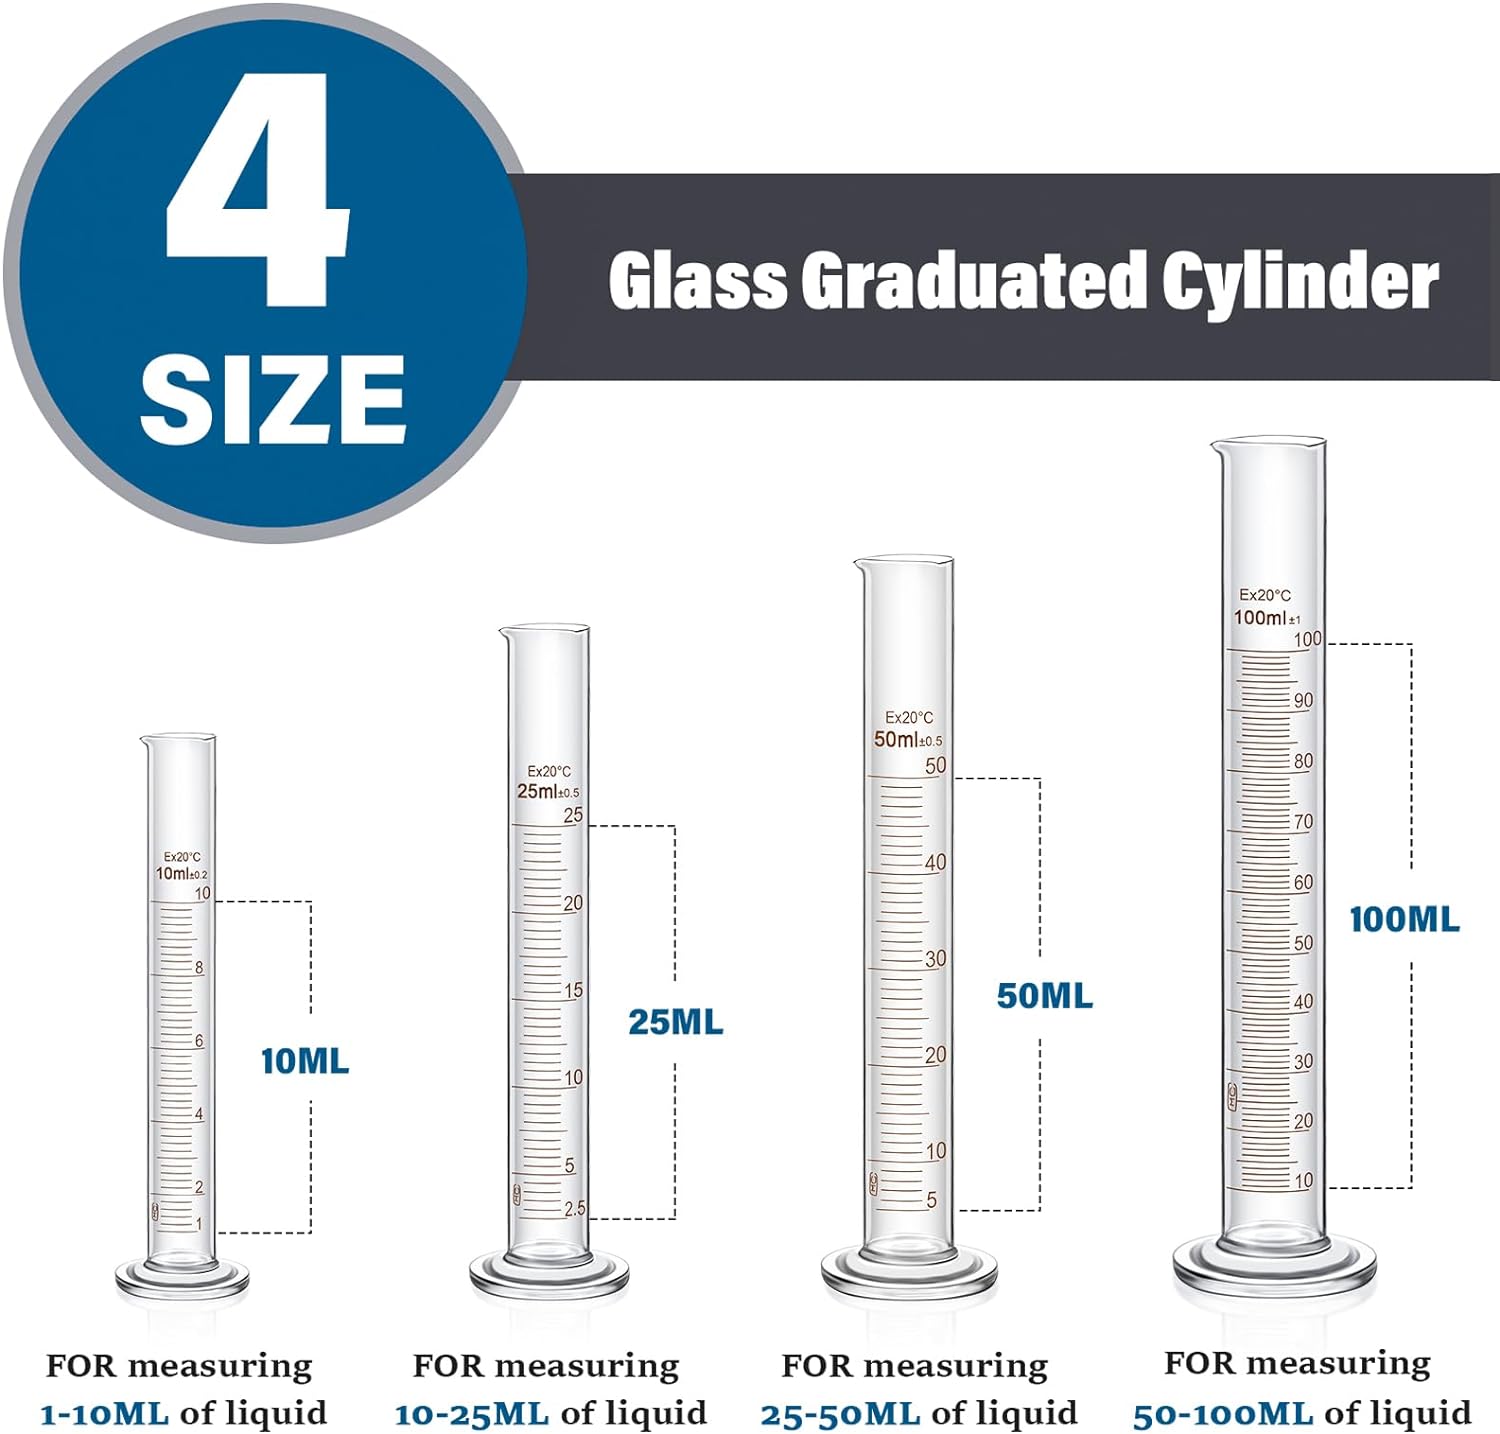 Essential Lab Glassware Set: 20 Pieces for Science Chemistry Experiments I Includes Graduated Cylinders, Glass Beakers, Droppers, Stirring Rods, and Measuring Cups